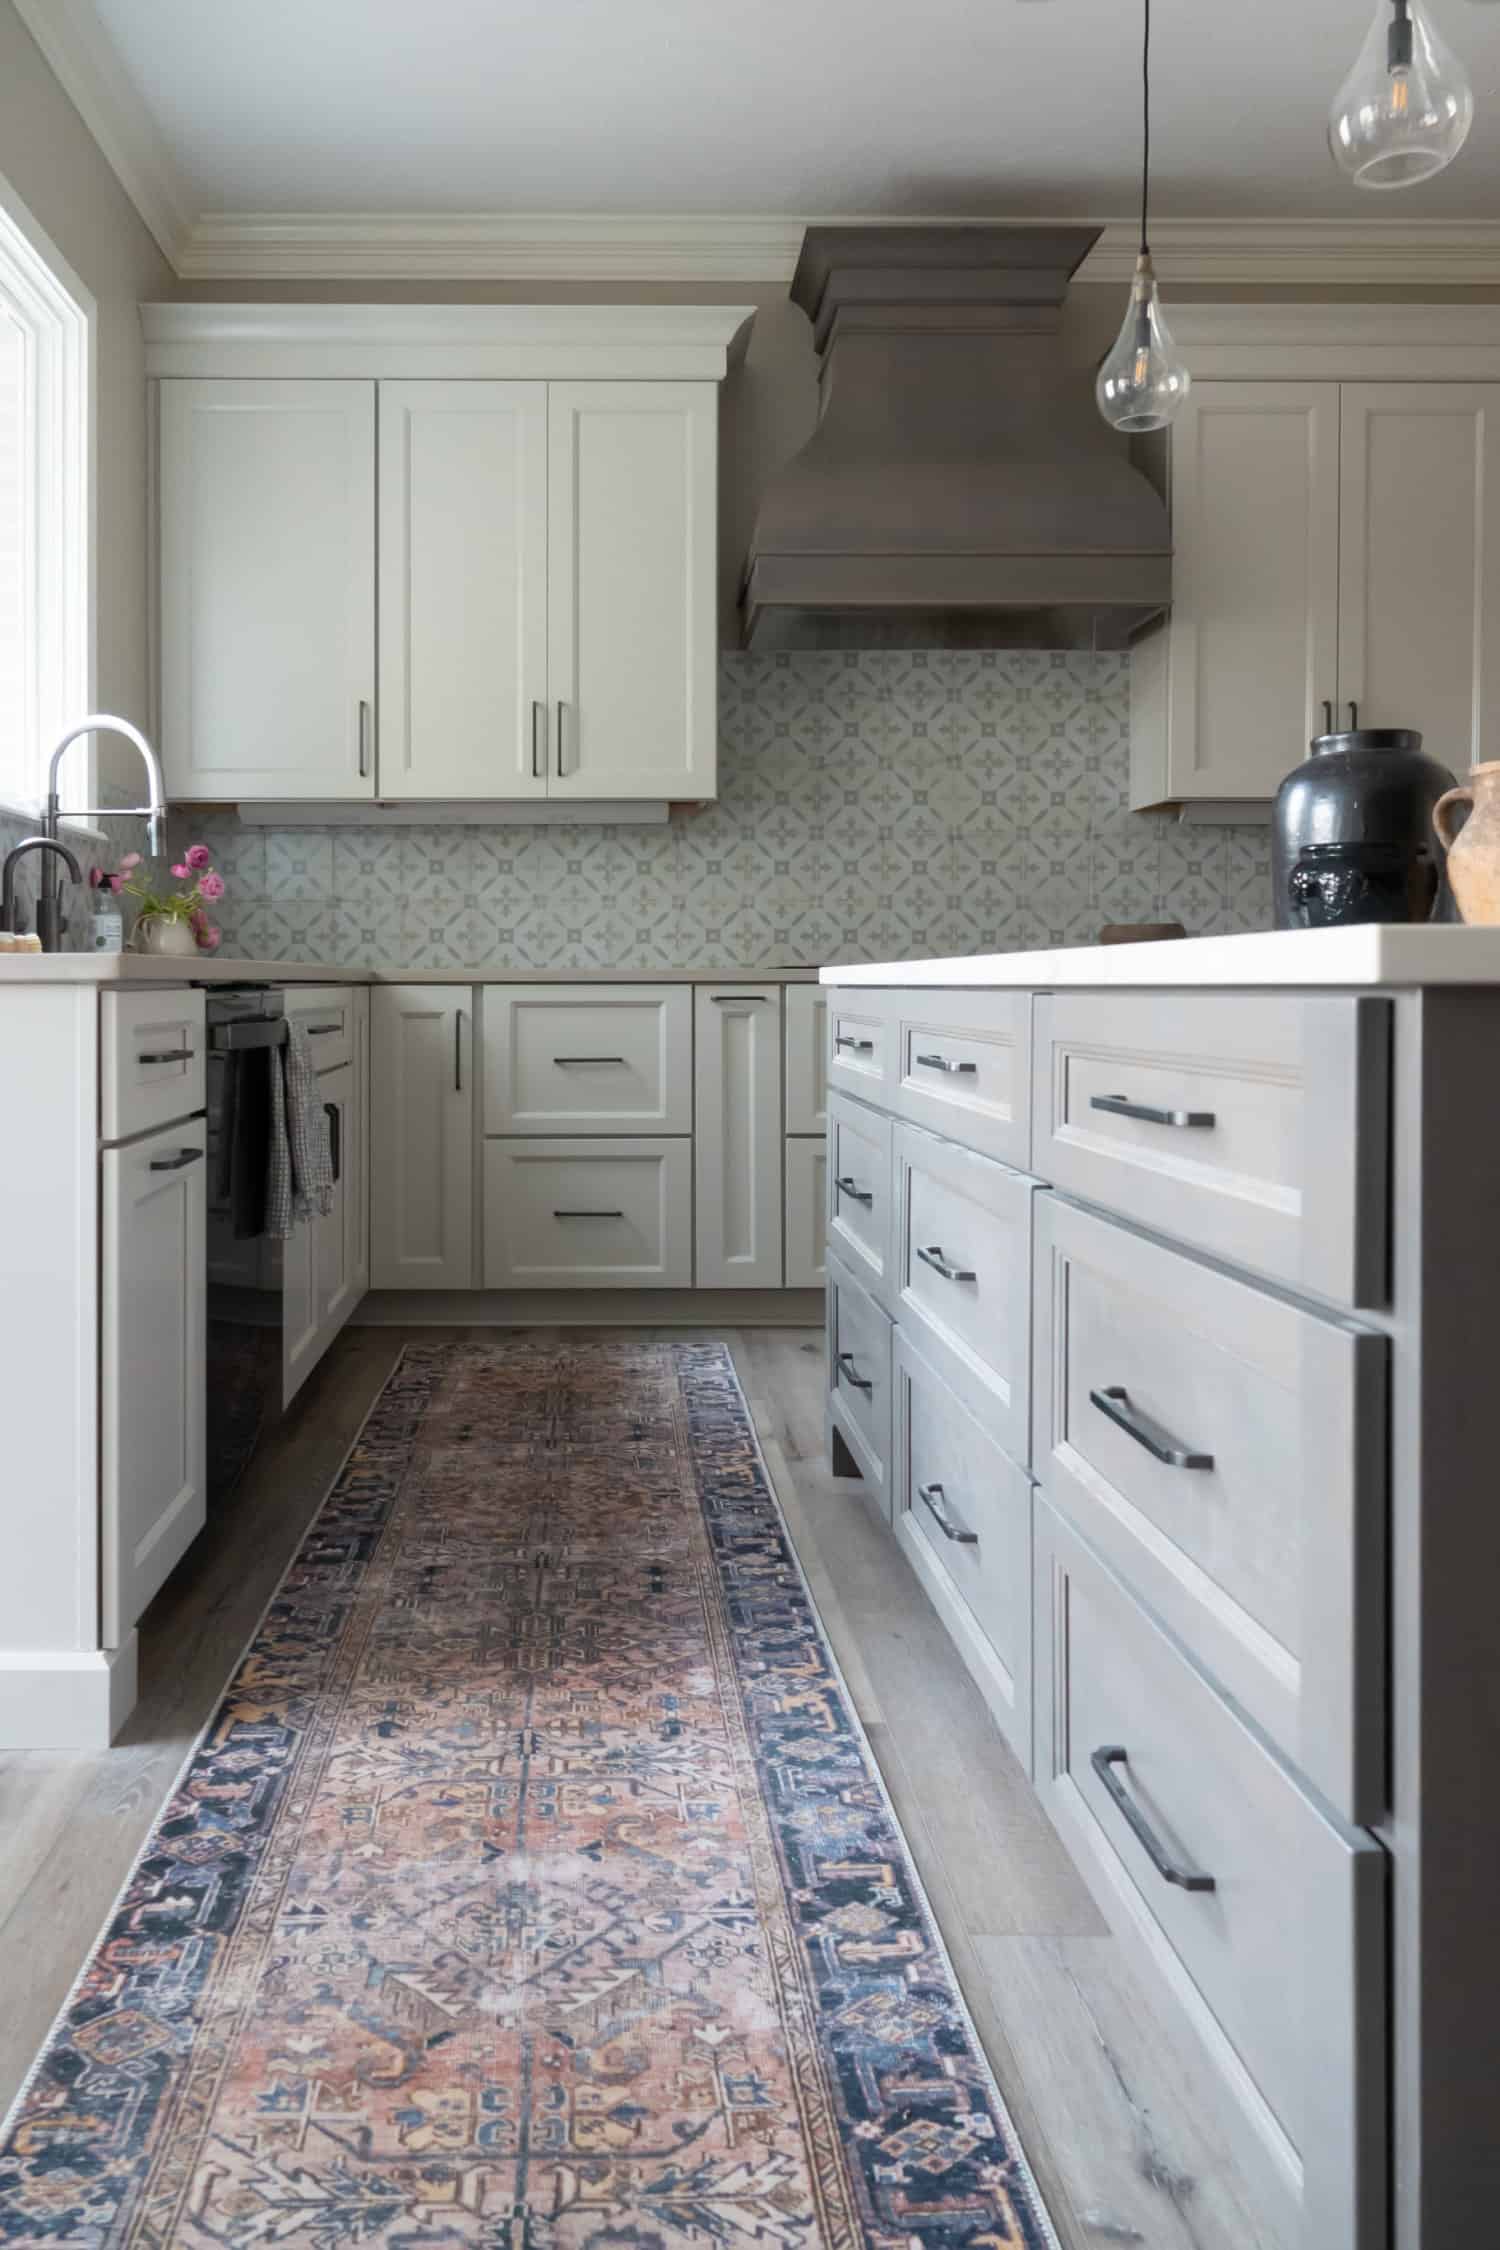 Nicholas Design Build | A remodeled kitchen with white cabinets and a rug on the floor.